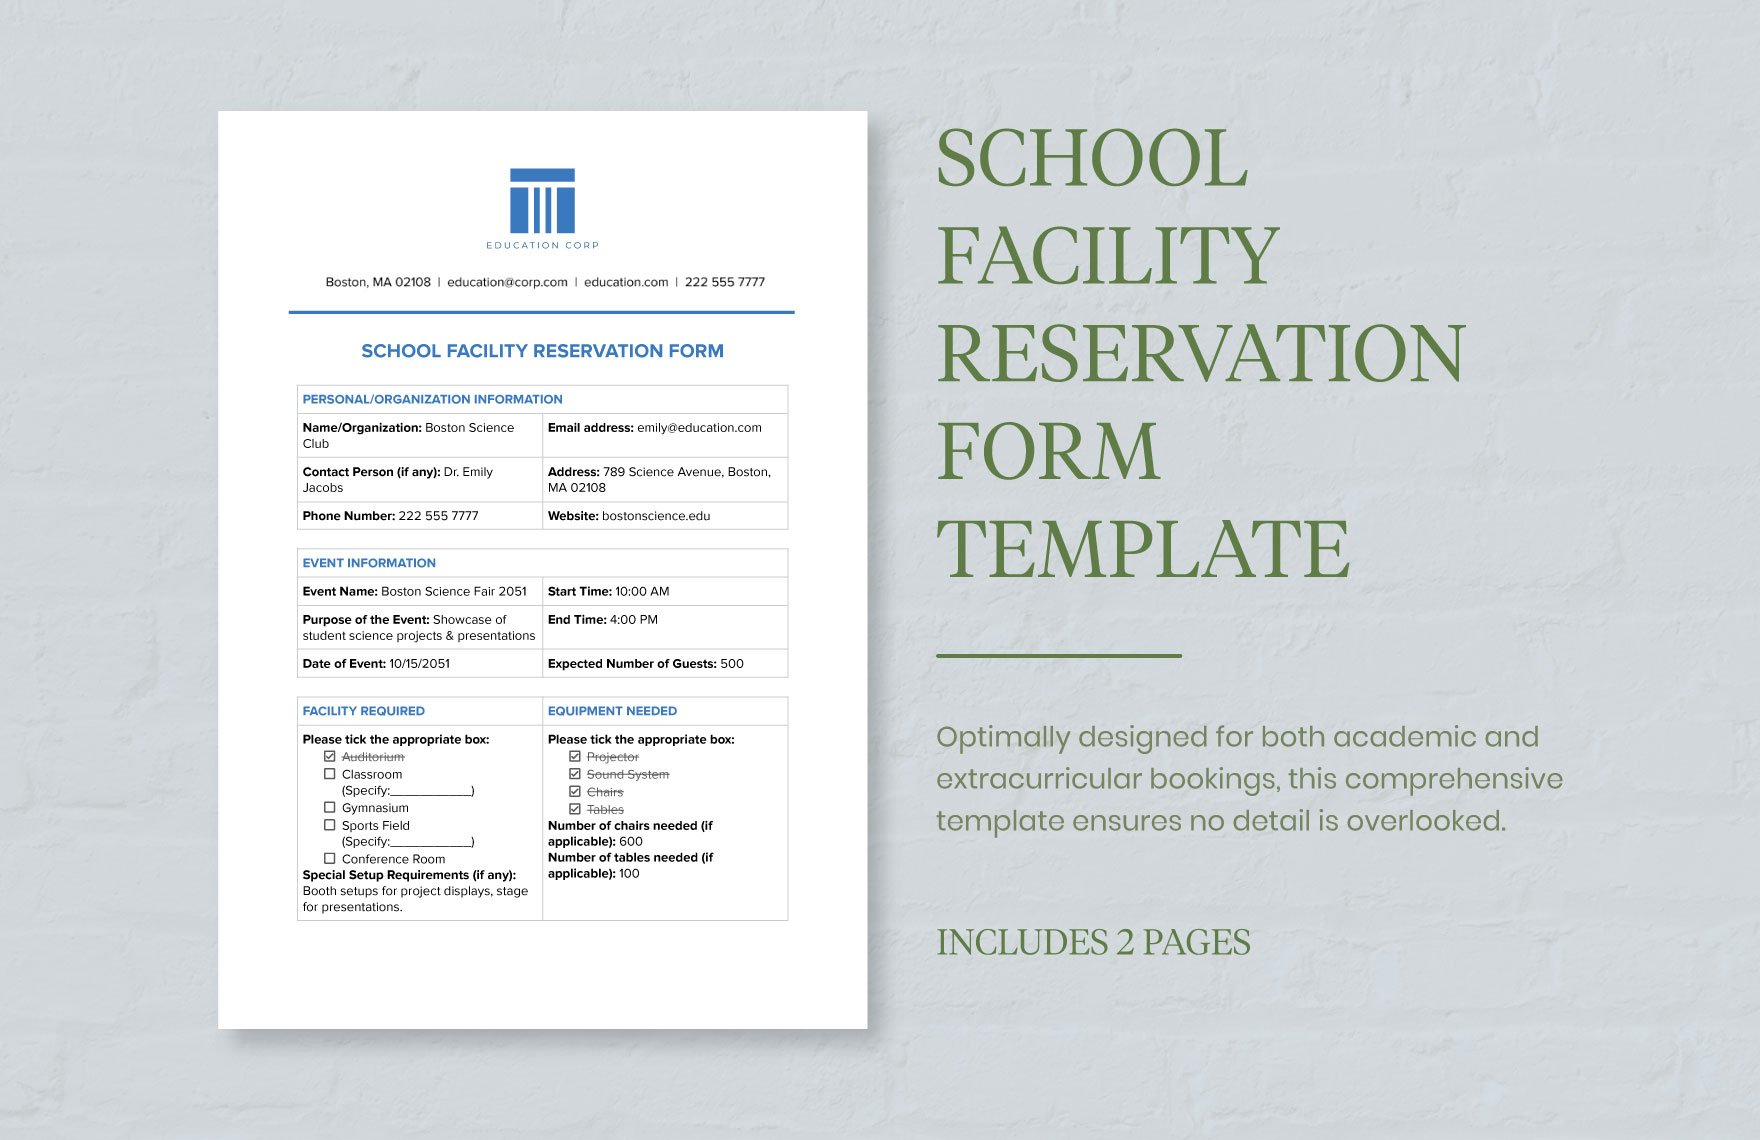 School Facility Reservation Form Template